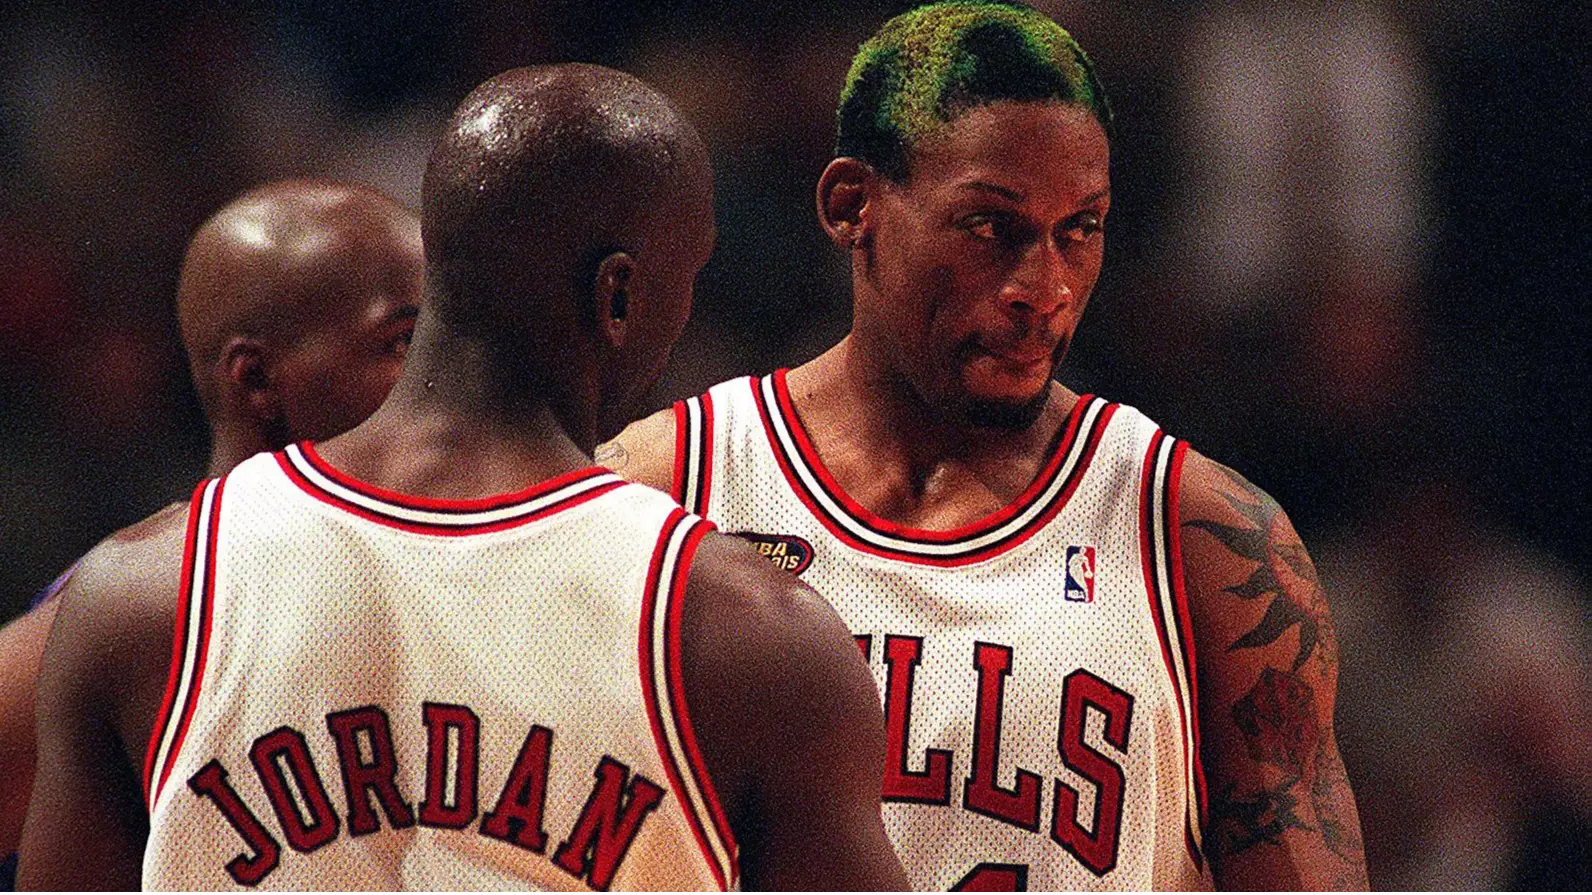 Dennis Rodman while playing for the Chicago Bulls.